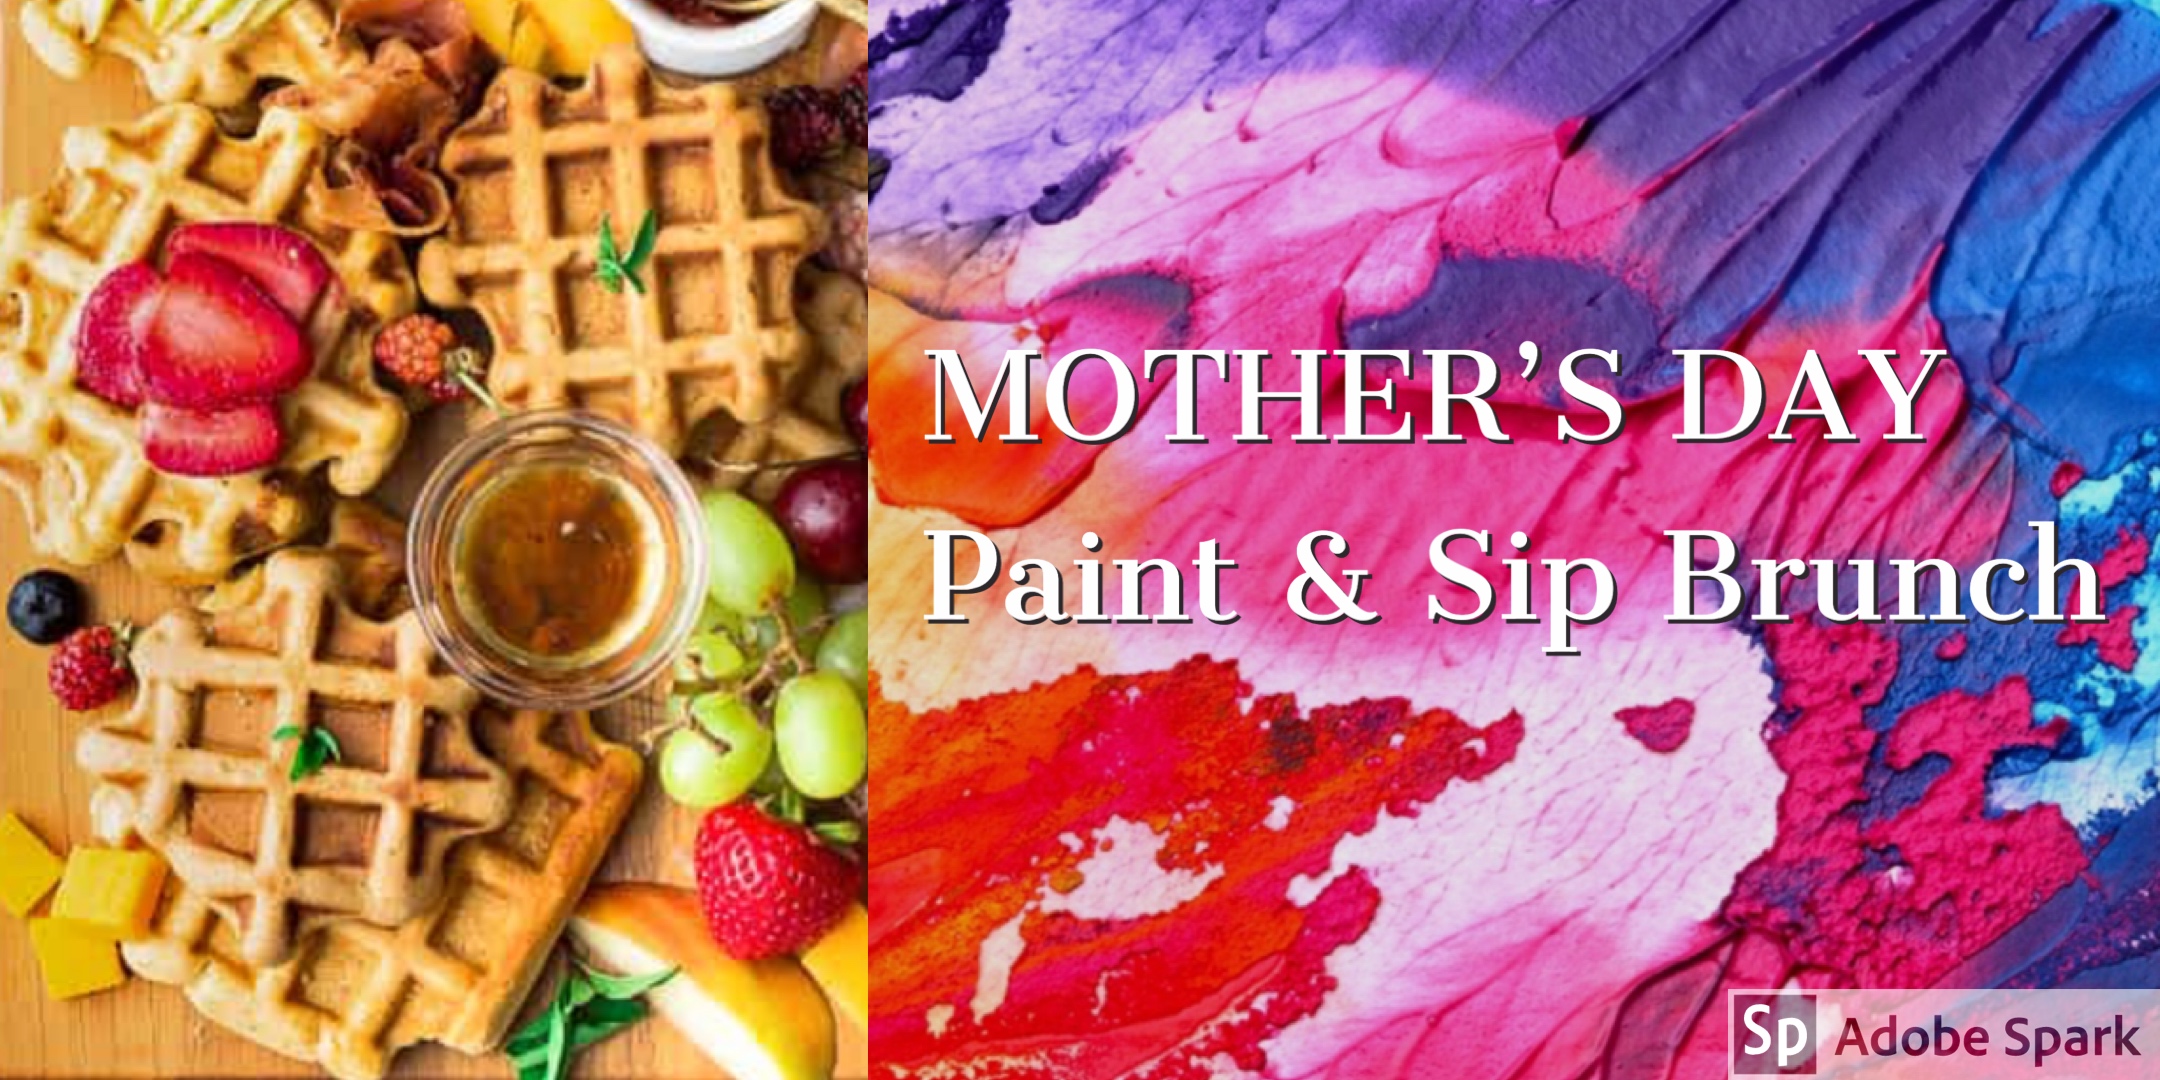 Mother's Day Paint & Sip Brunch